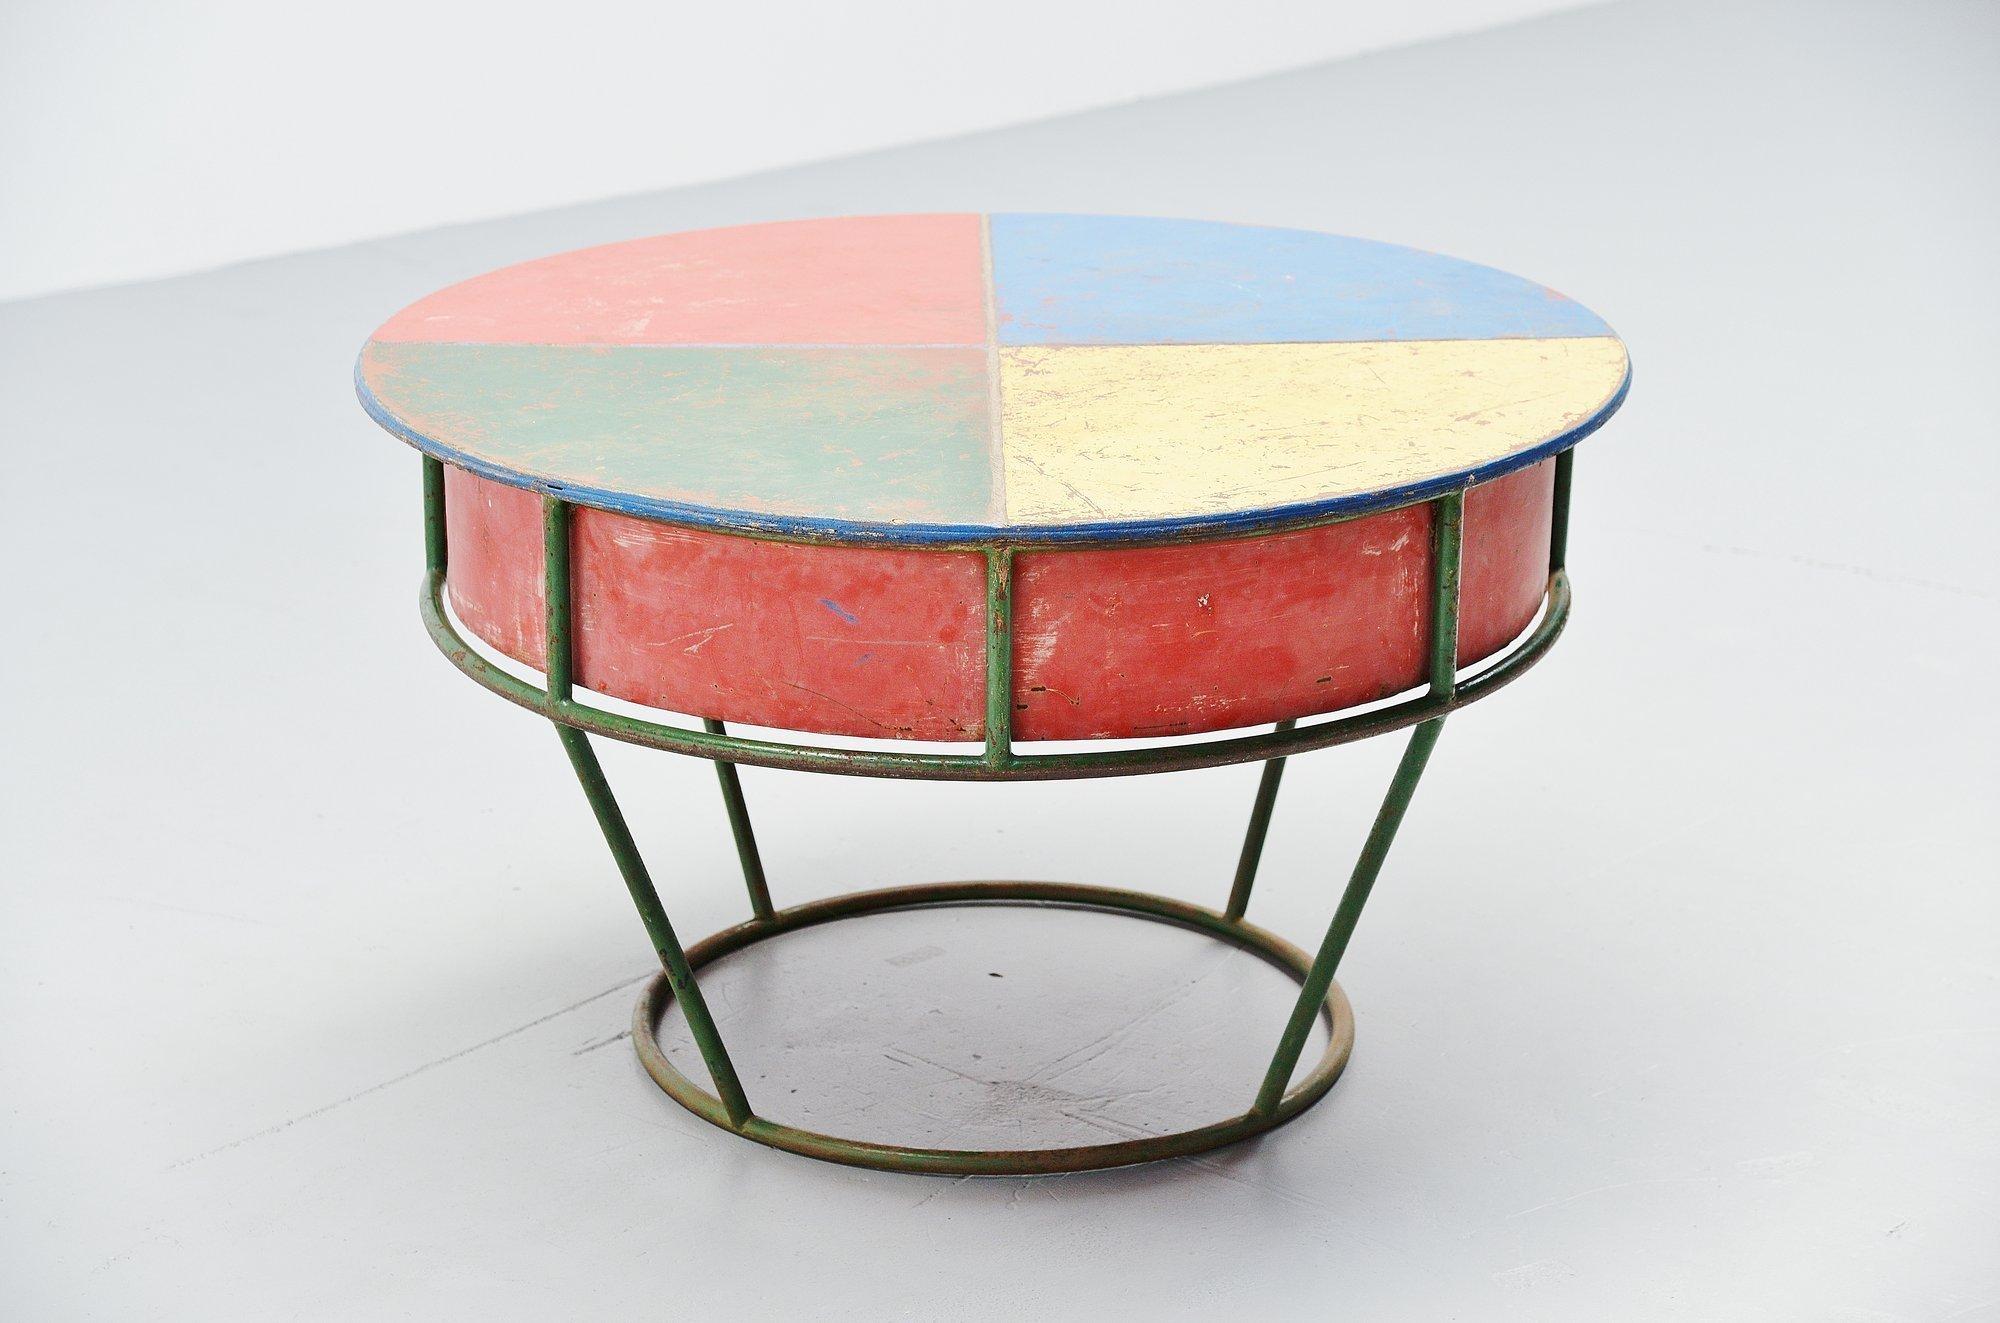 Very nice and decorative playful garden table, France, 1950. This very nice and characteristic piece has an amazing patina from age and usage. This colorful table has a removable top and you can put sand or water underneath it. Very nice piece for